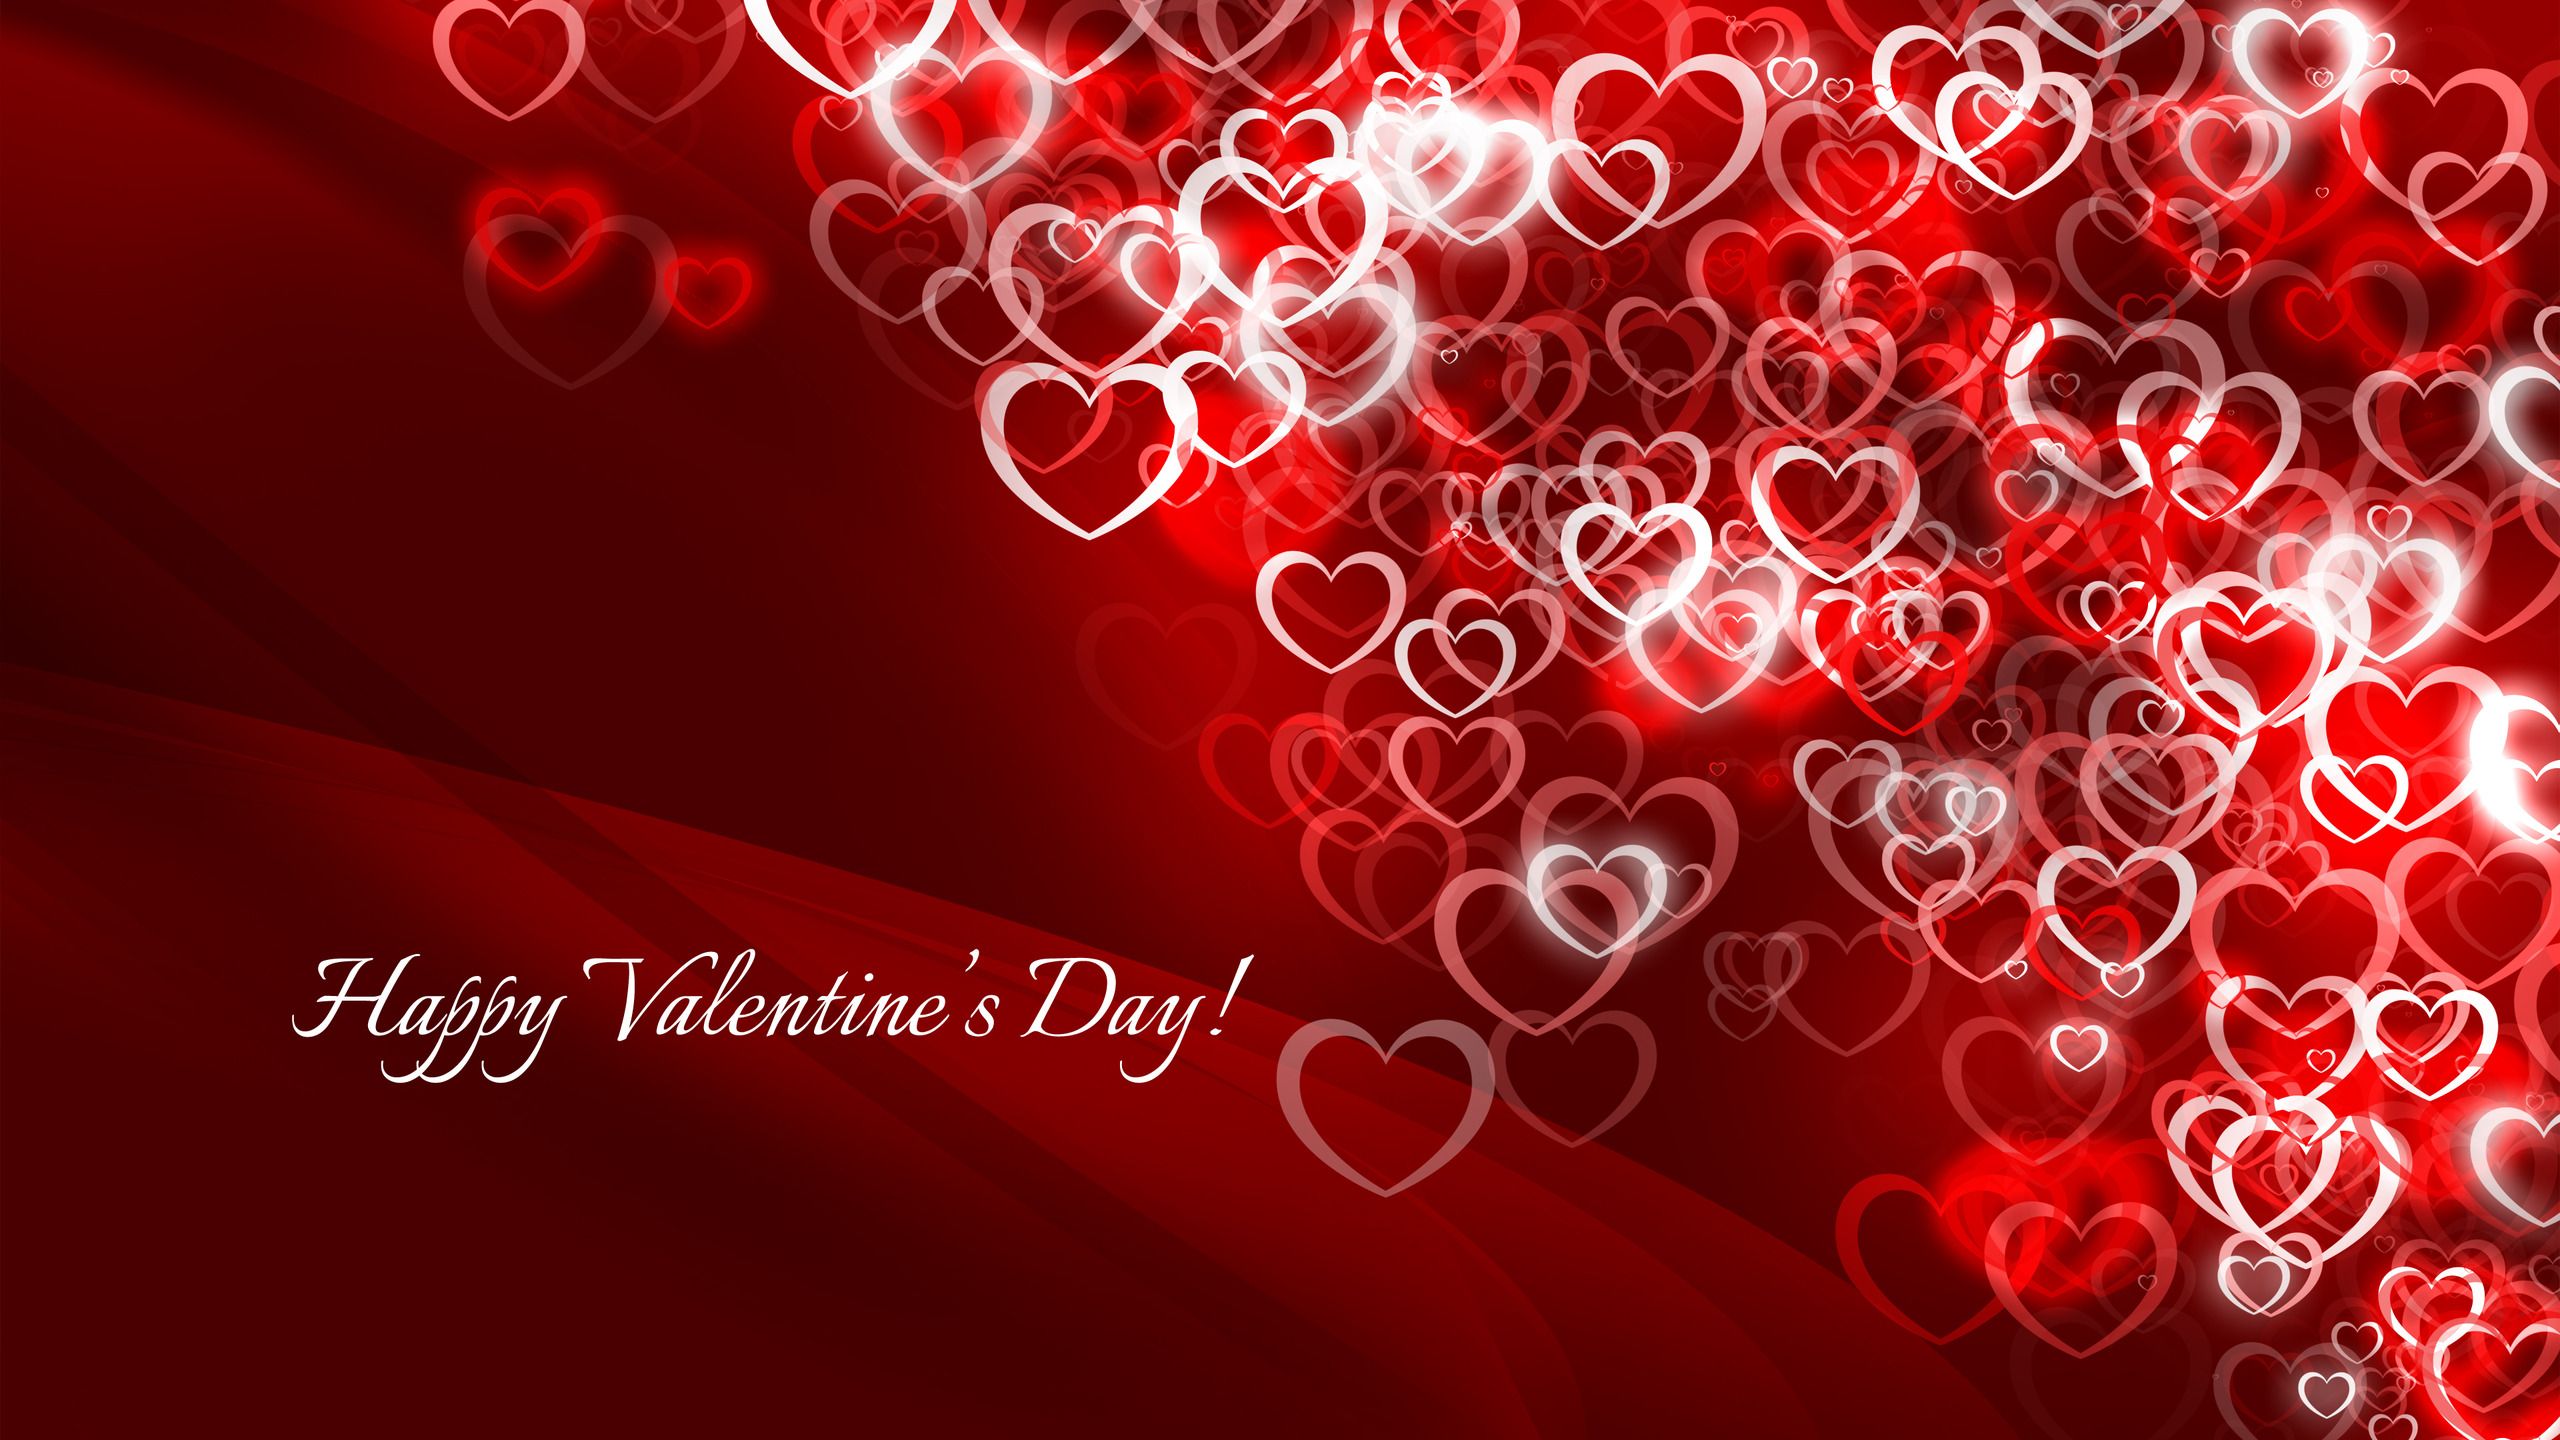 Happy valentine day pictures wallpaper hd